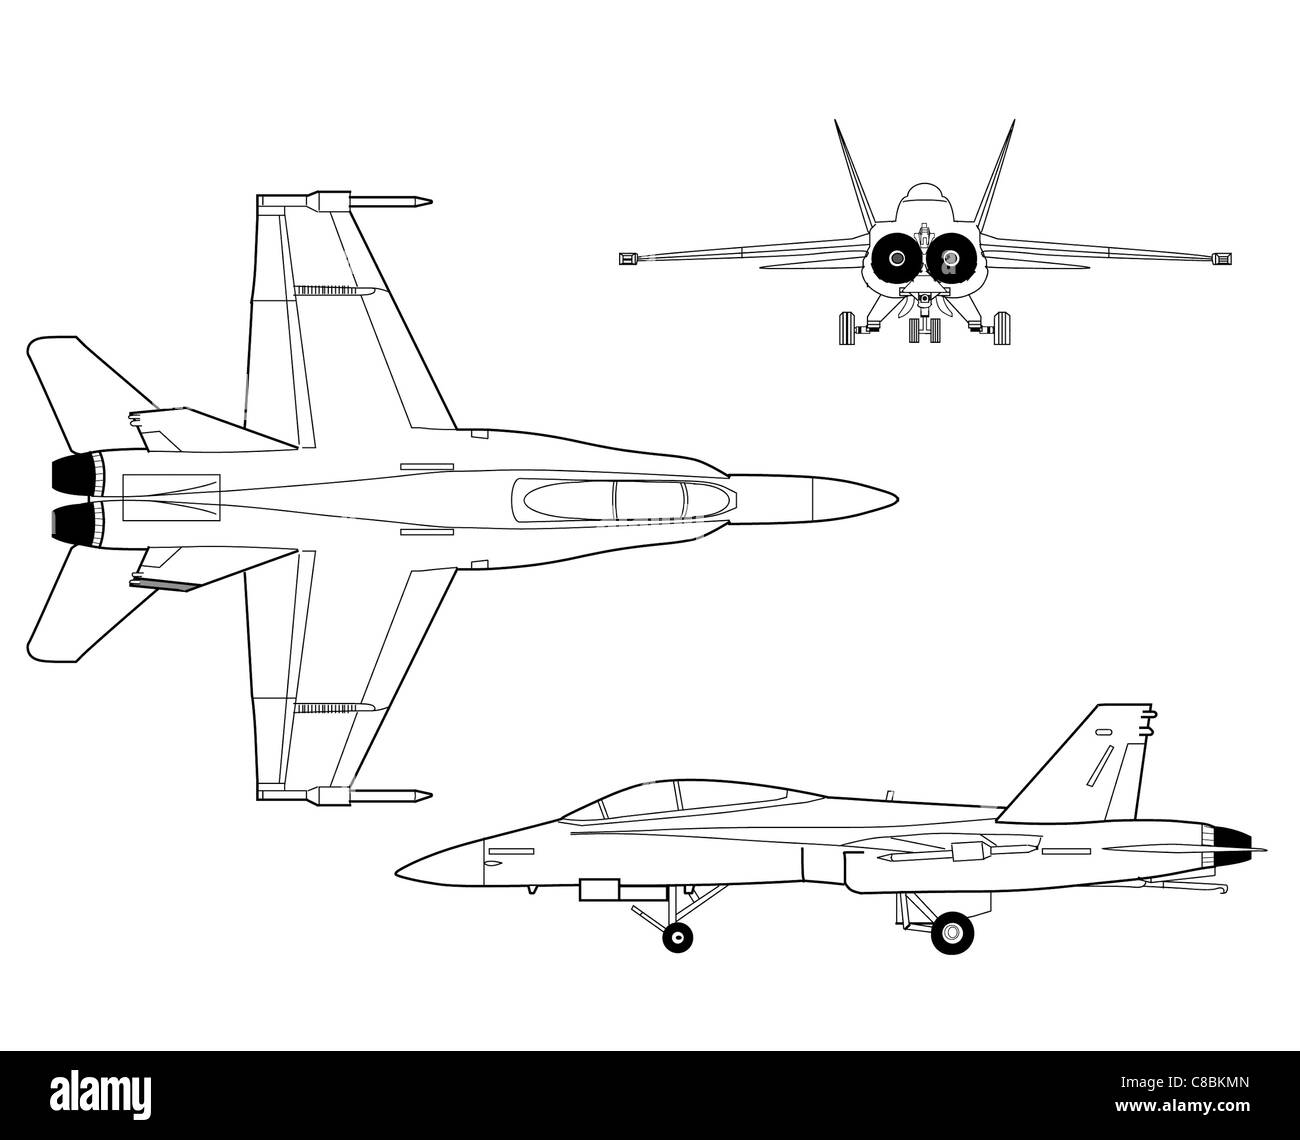 3 view aircraft line art drawing The F-18 Systems Research Aircraft ...